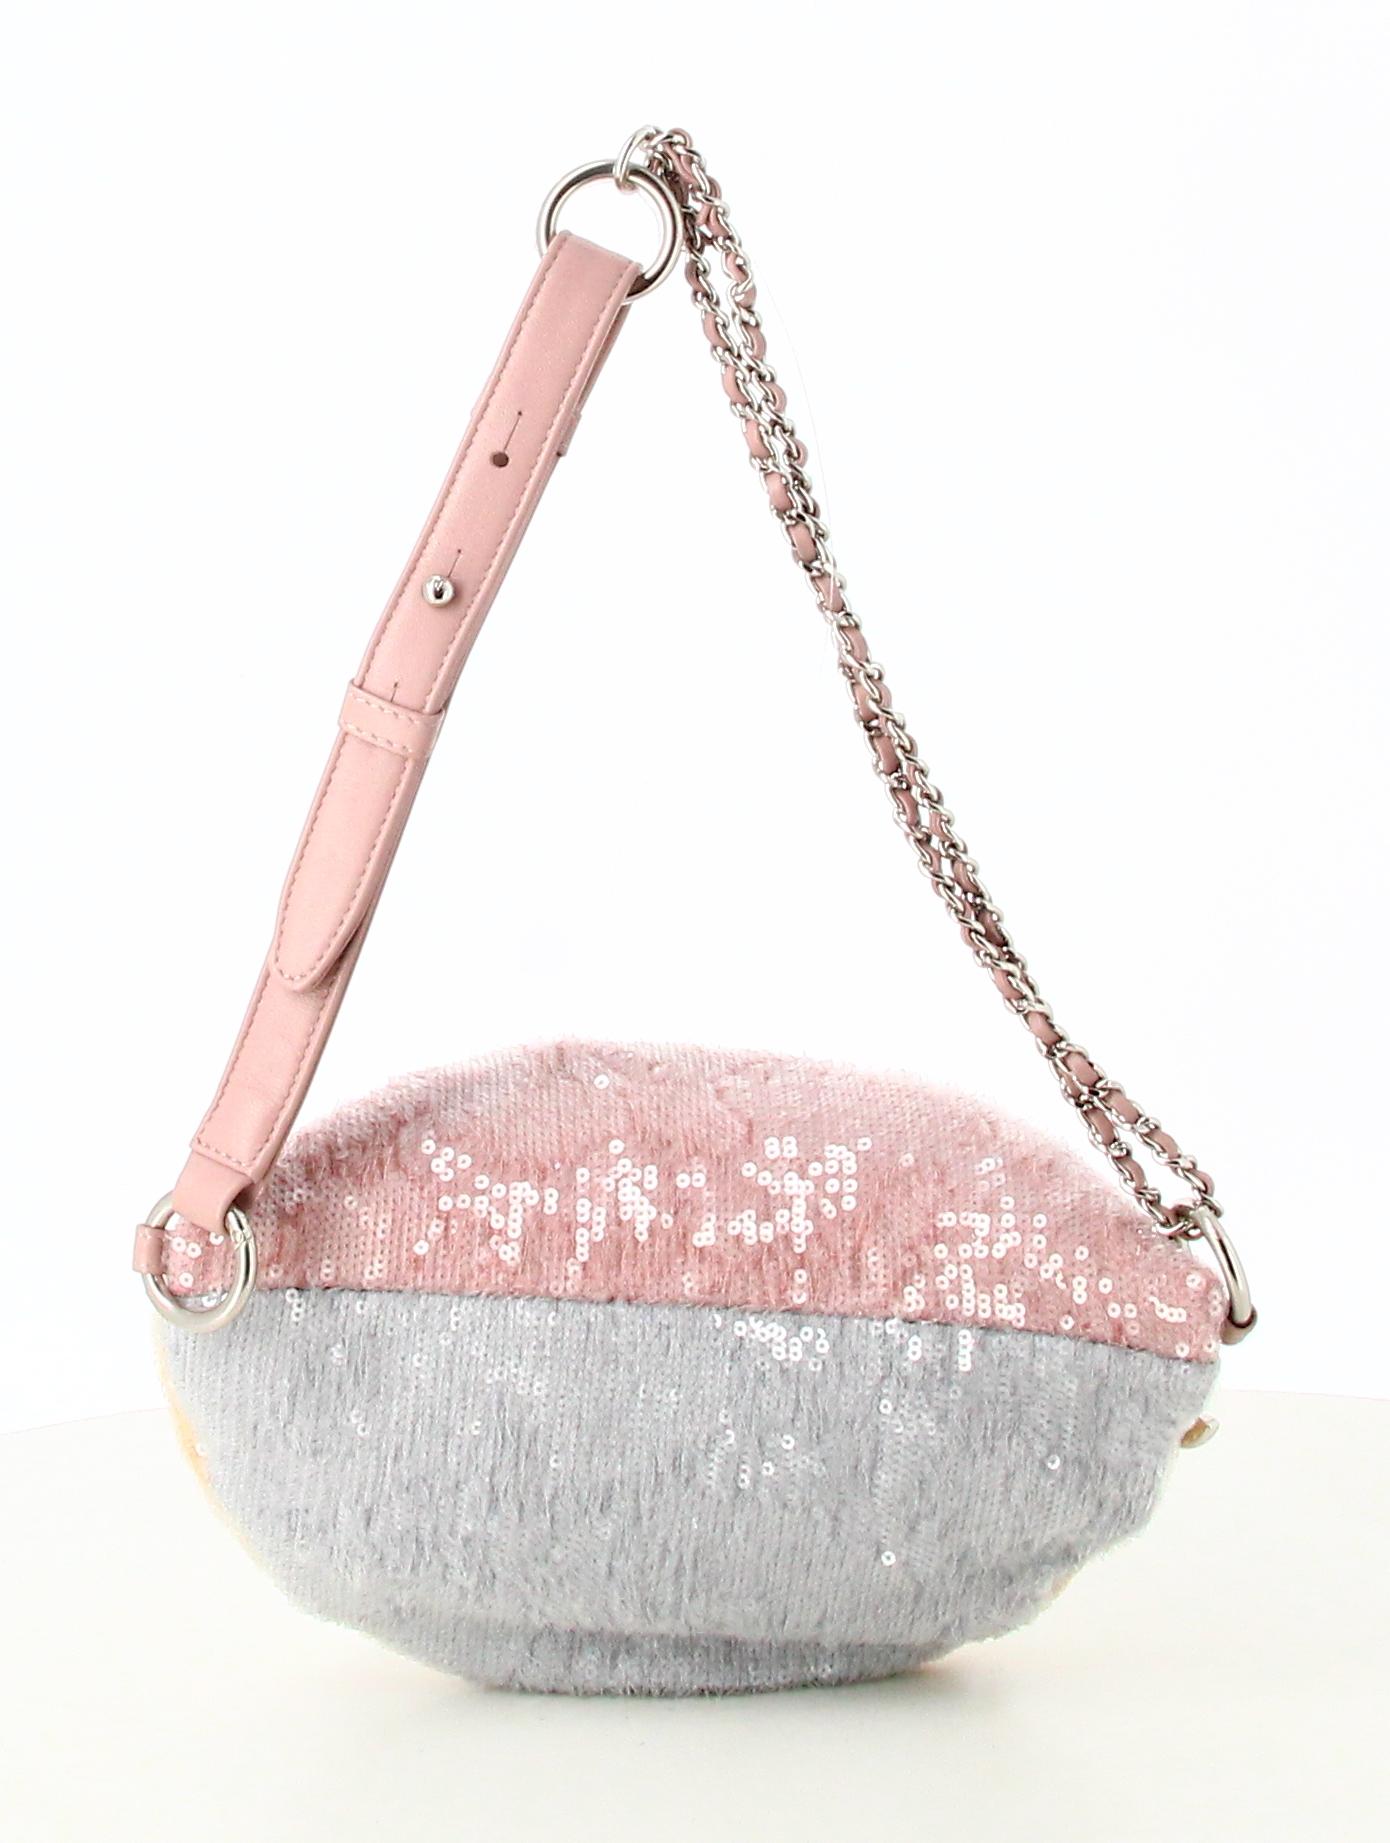 2018 Chanel Rose Beige and Grey Strass Banana Handbag 

- Very good condition. Shows very slight signs of wear over time.
- Chanel fanny pack 
- From Chanel private sales 
- Strass multicolor
- Clasp : Silver zip
- Pink leather strap and silver